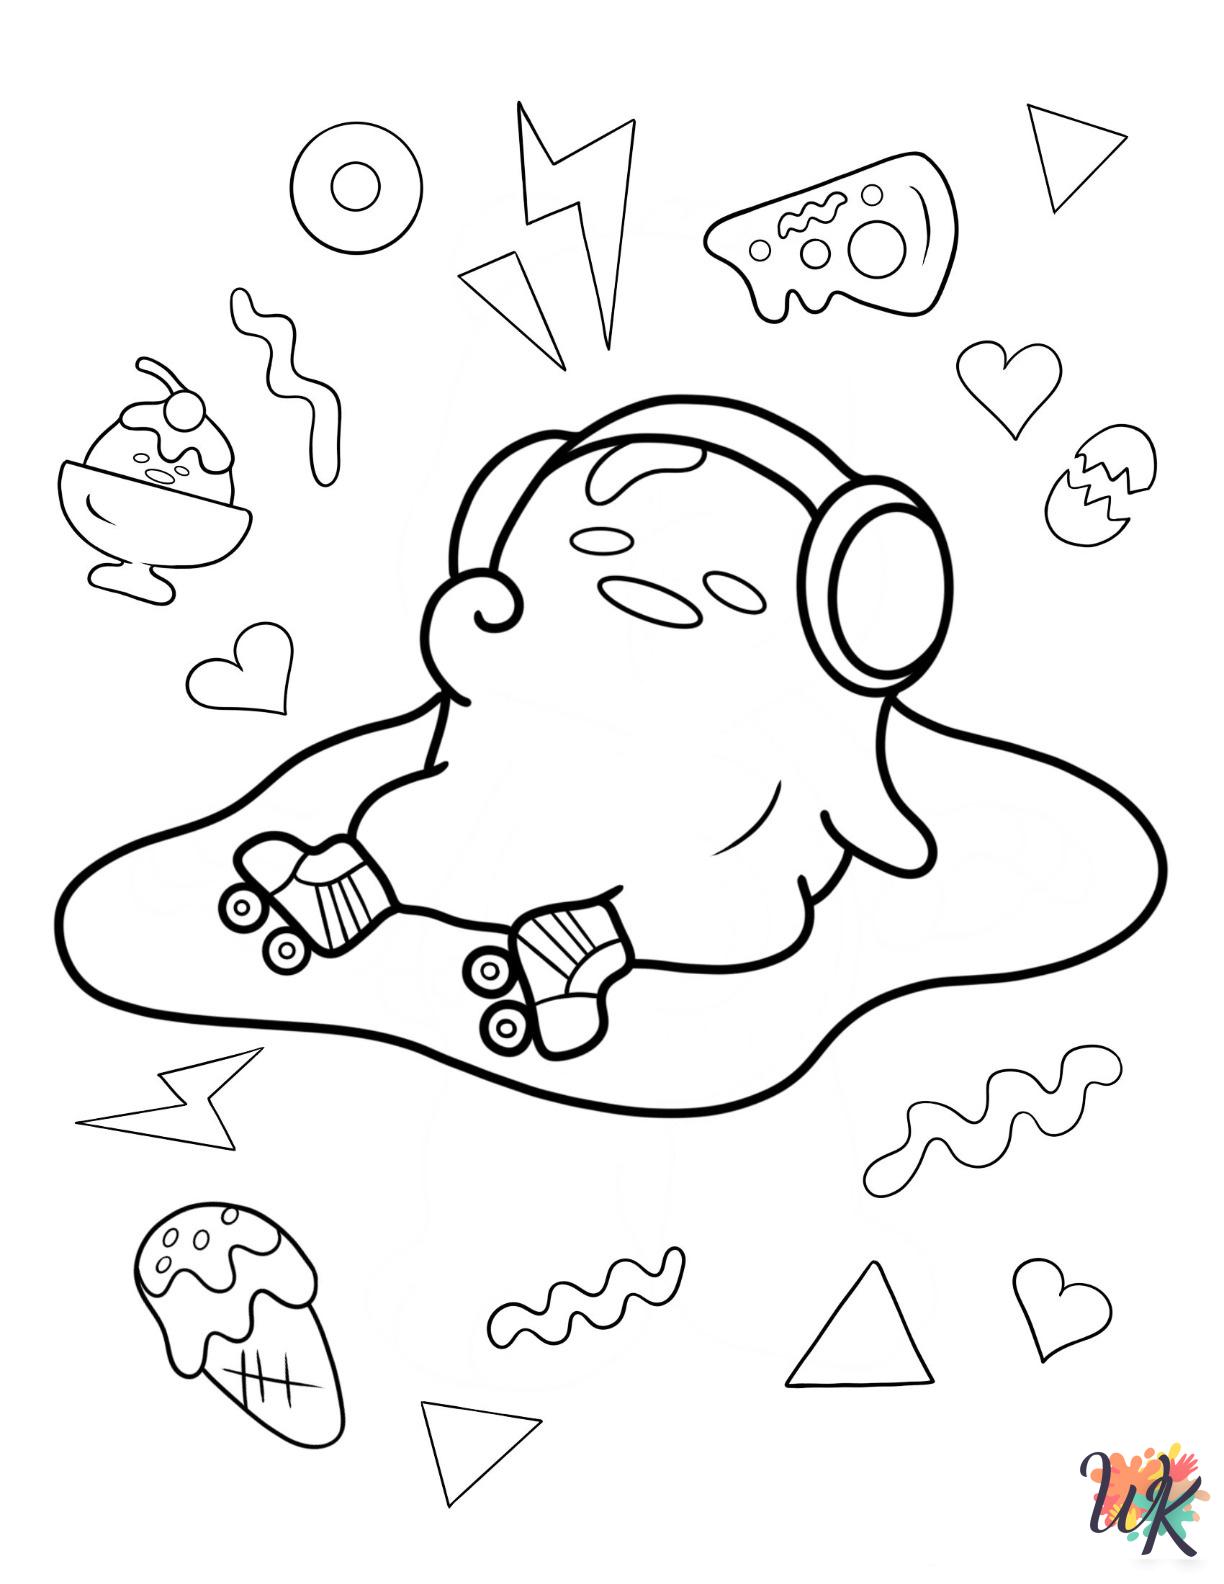 Gudetama themed coloring pages